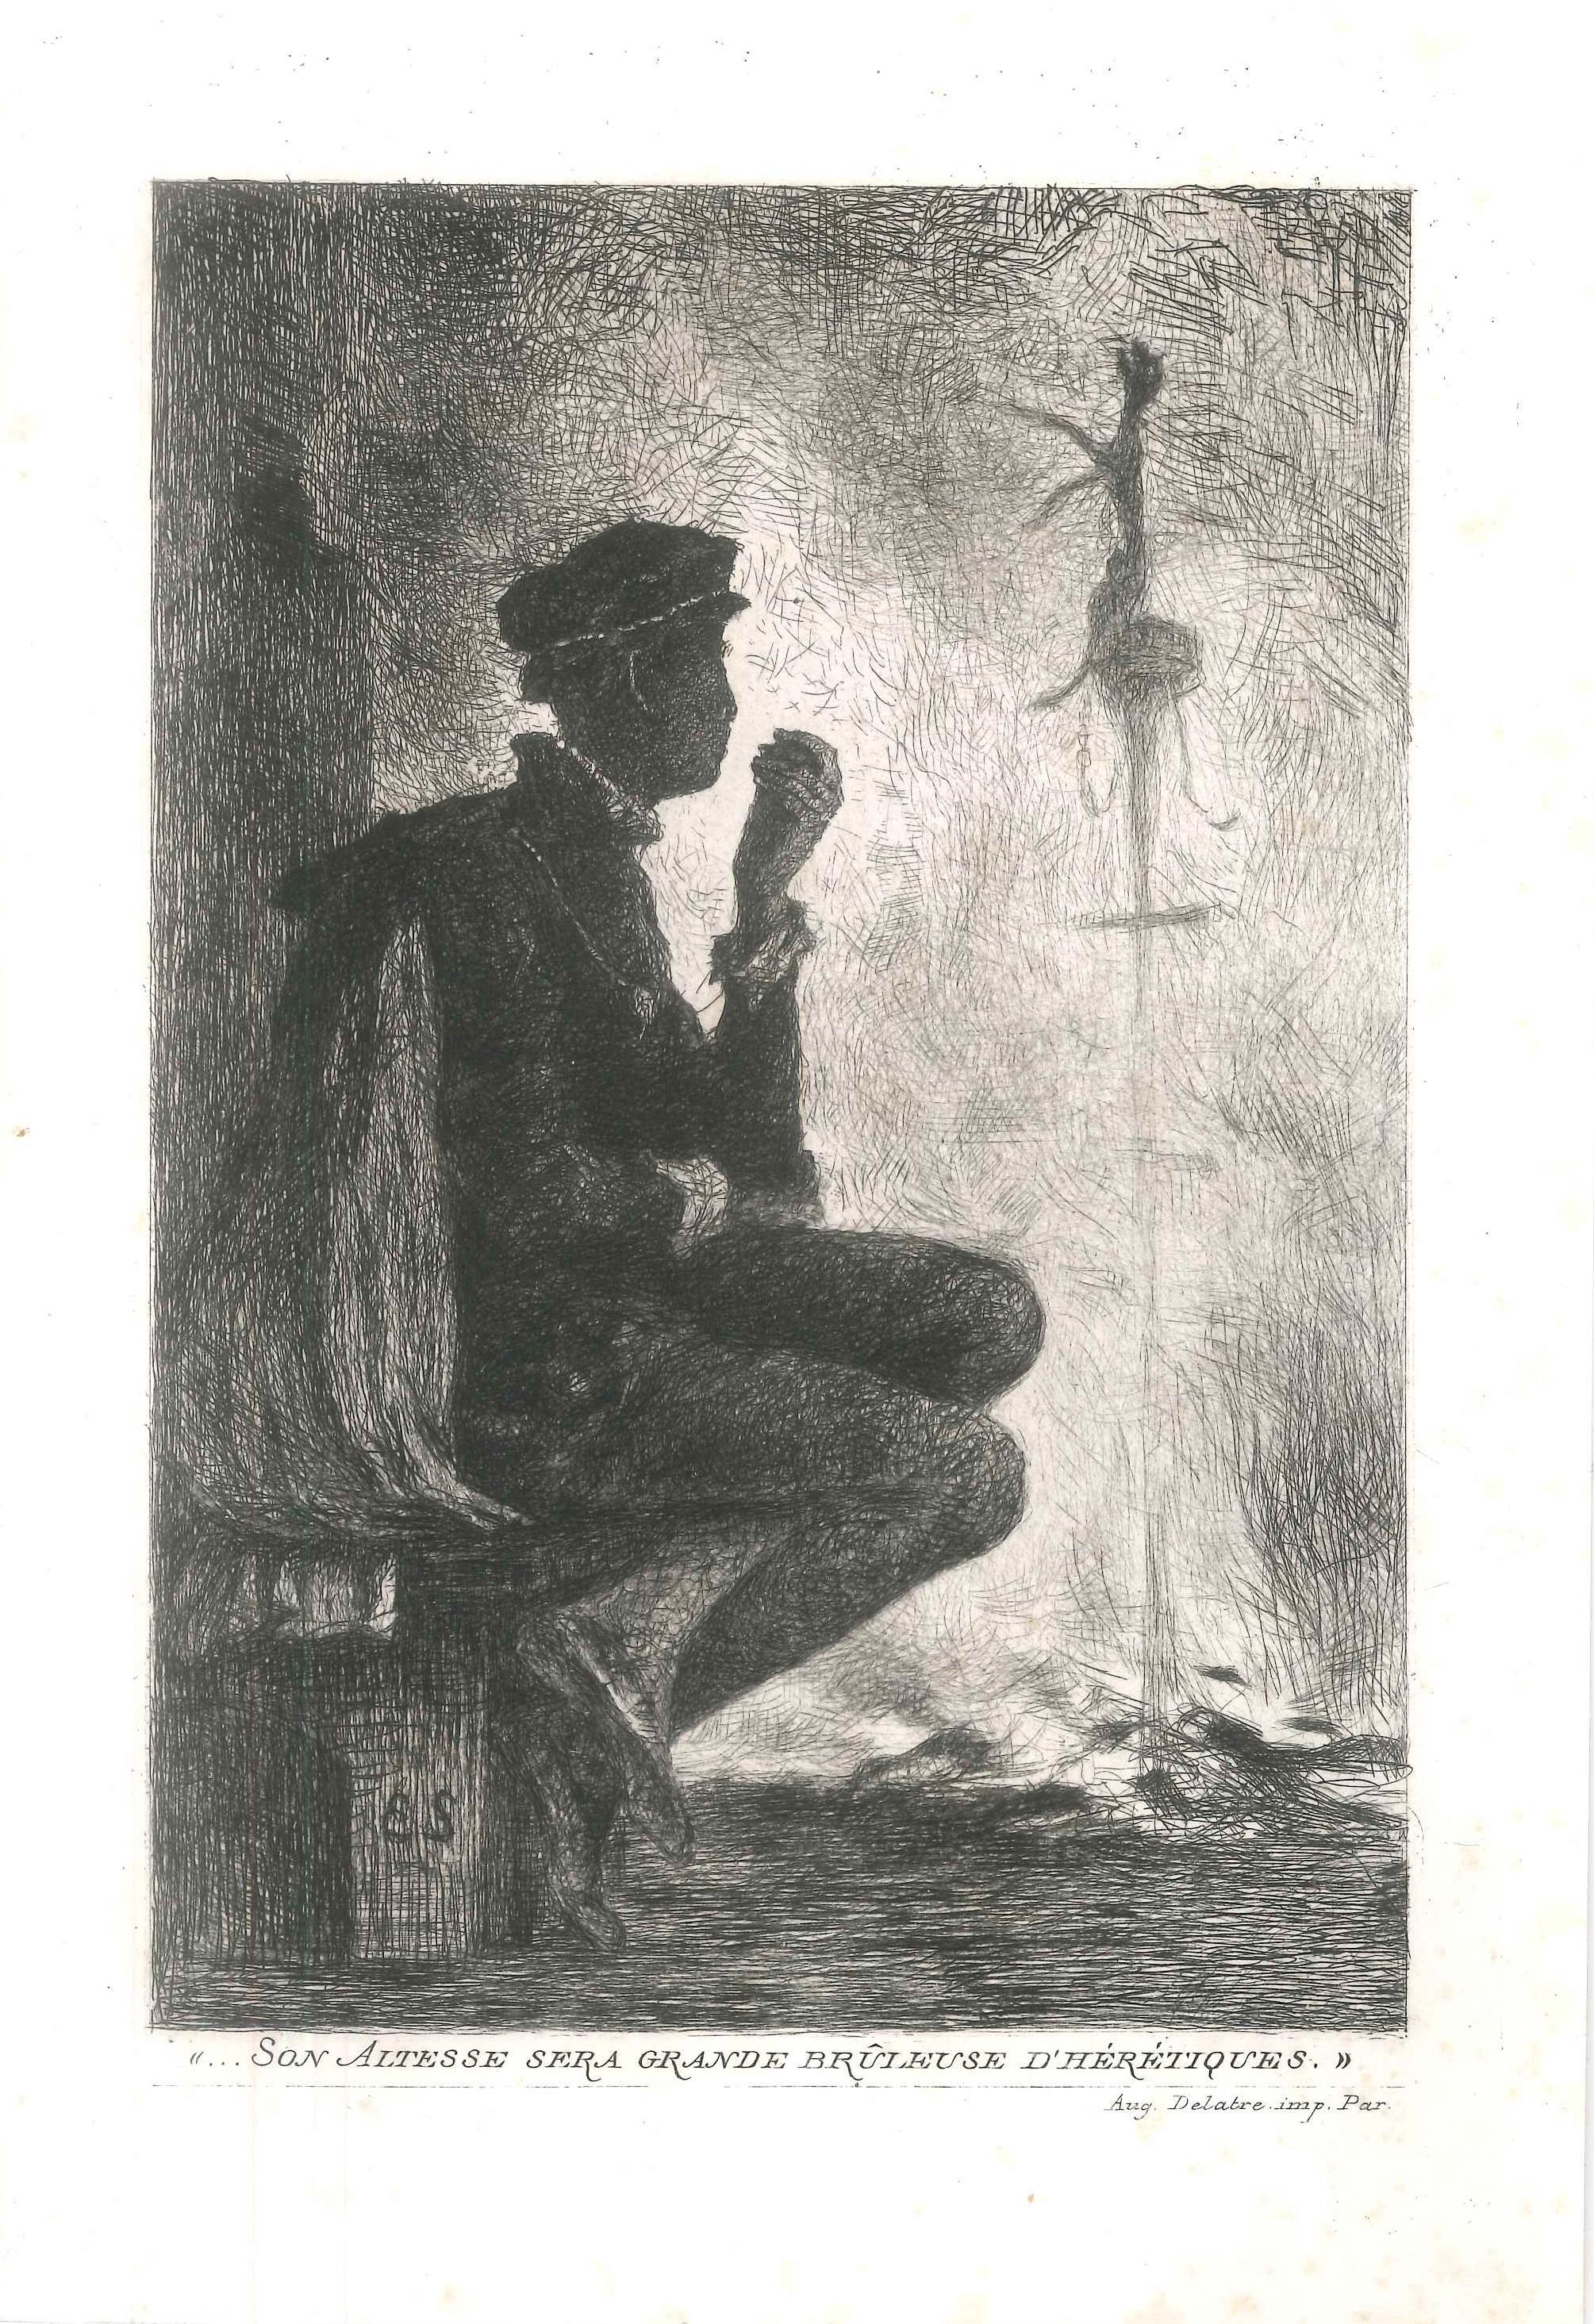 Unknown Figurative Print - Son Altesse... - Original Aquatint and Burin by an Anonymous French Artist